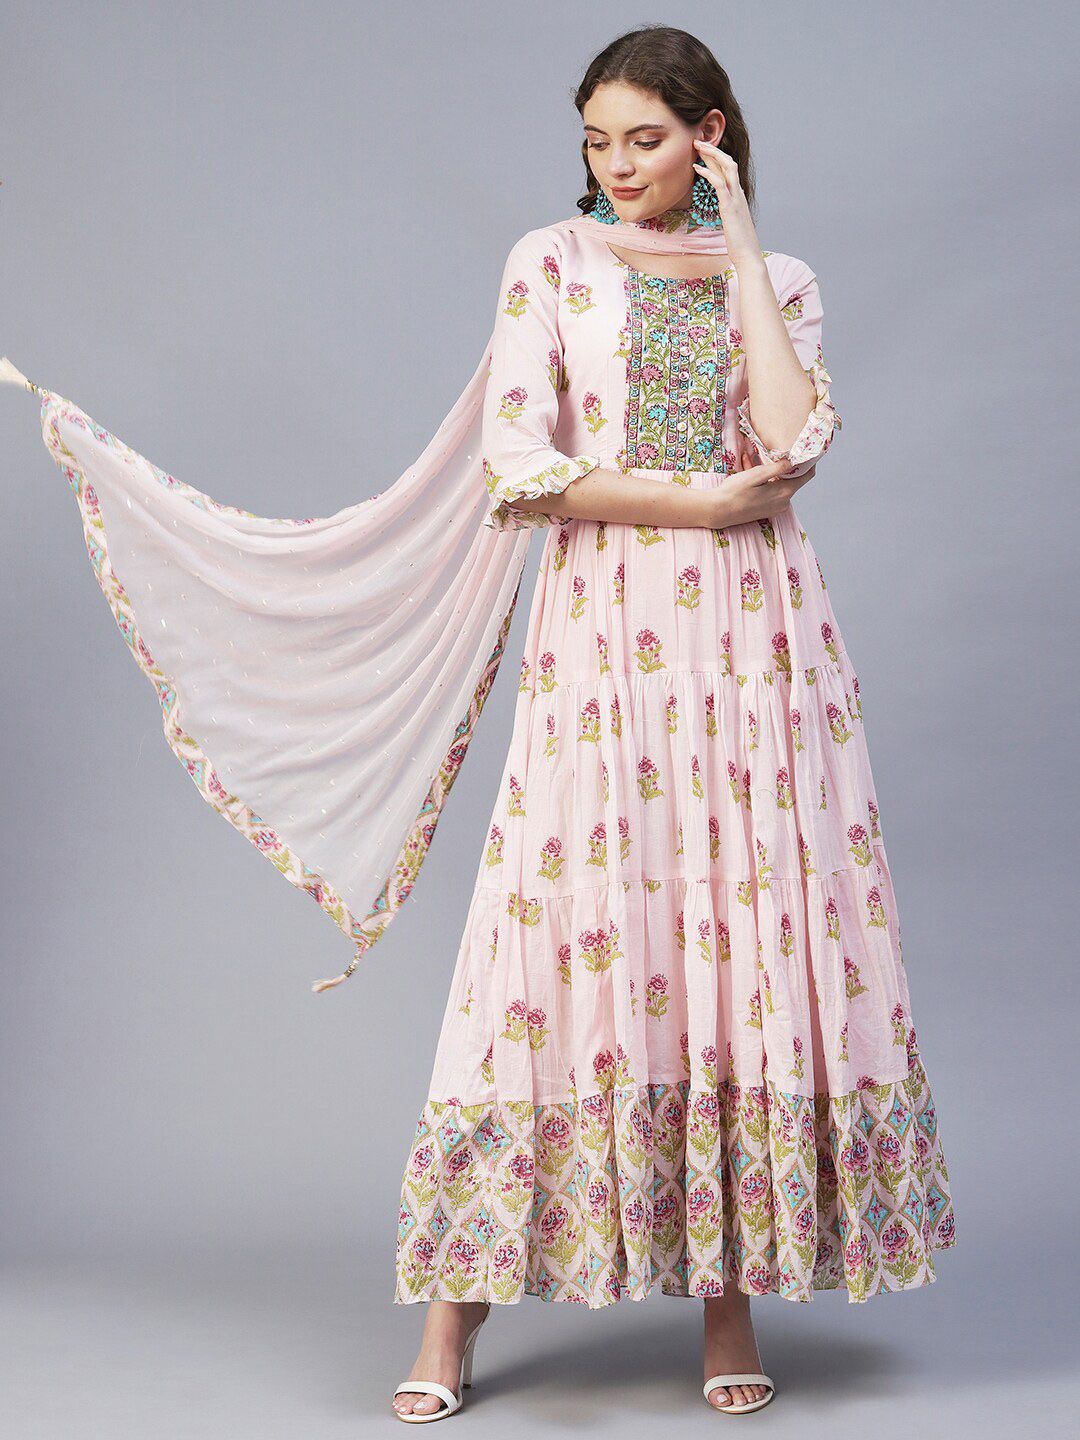 FASHOR Pink & Beige Cotton Floral Ethnic Maxi Dress Price in India